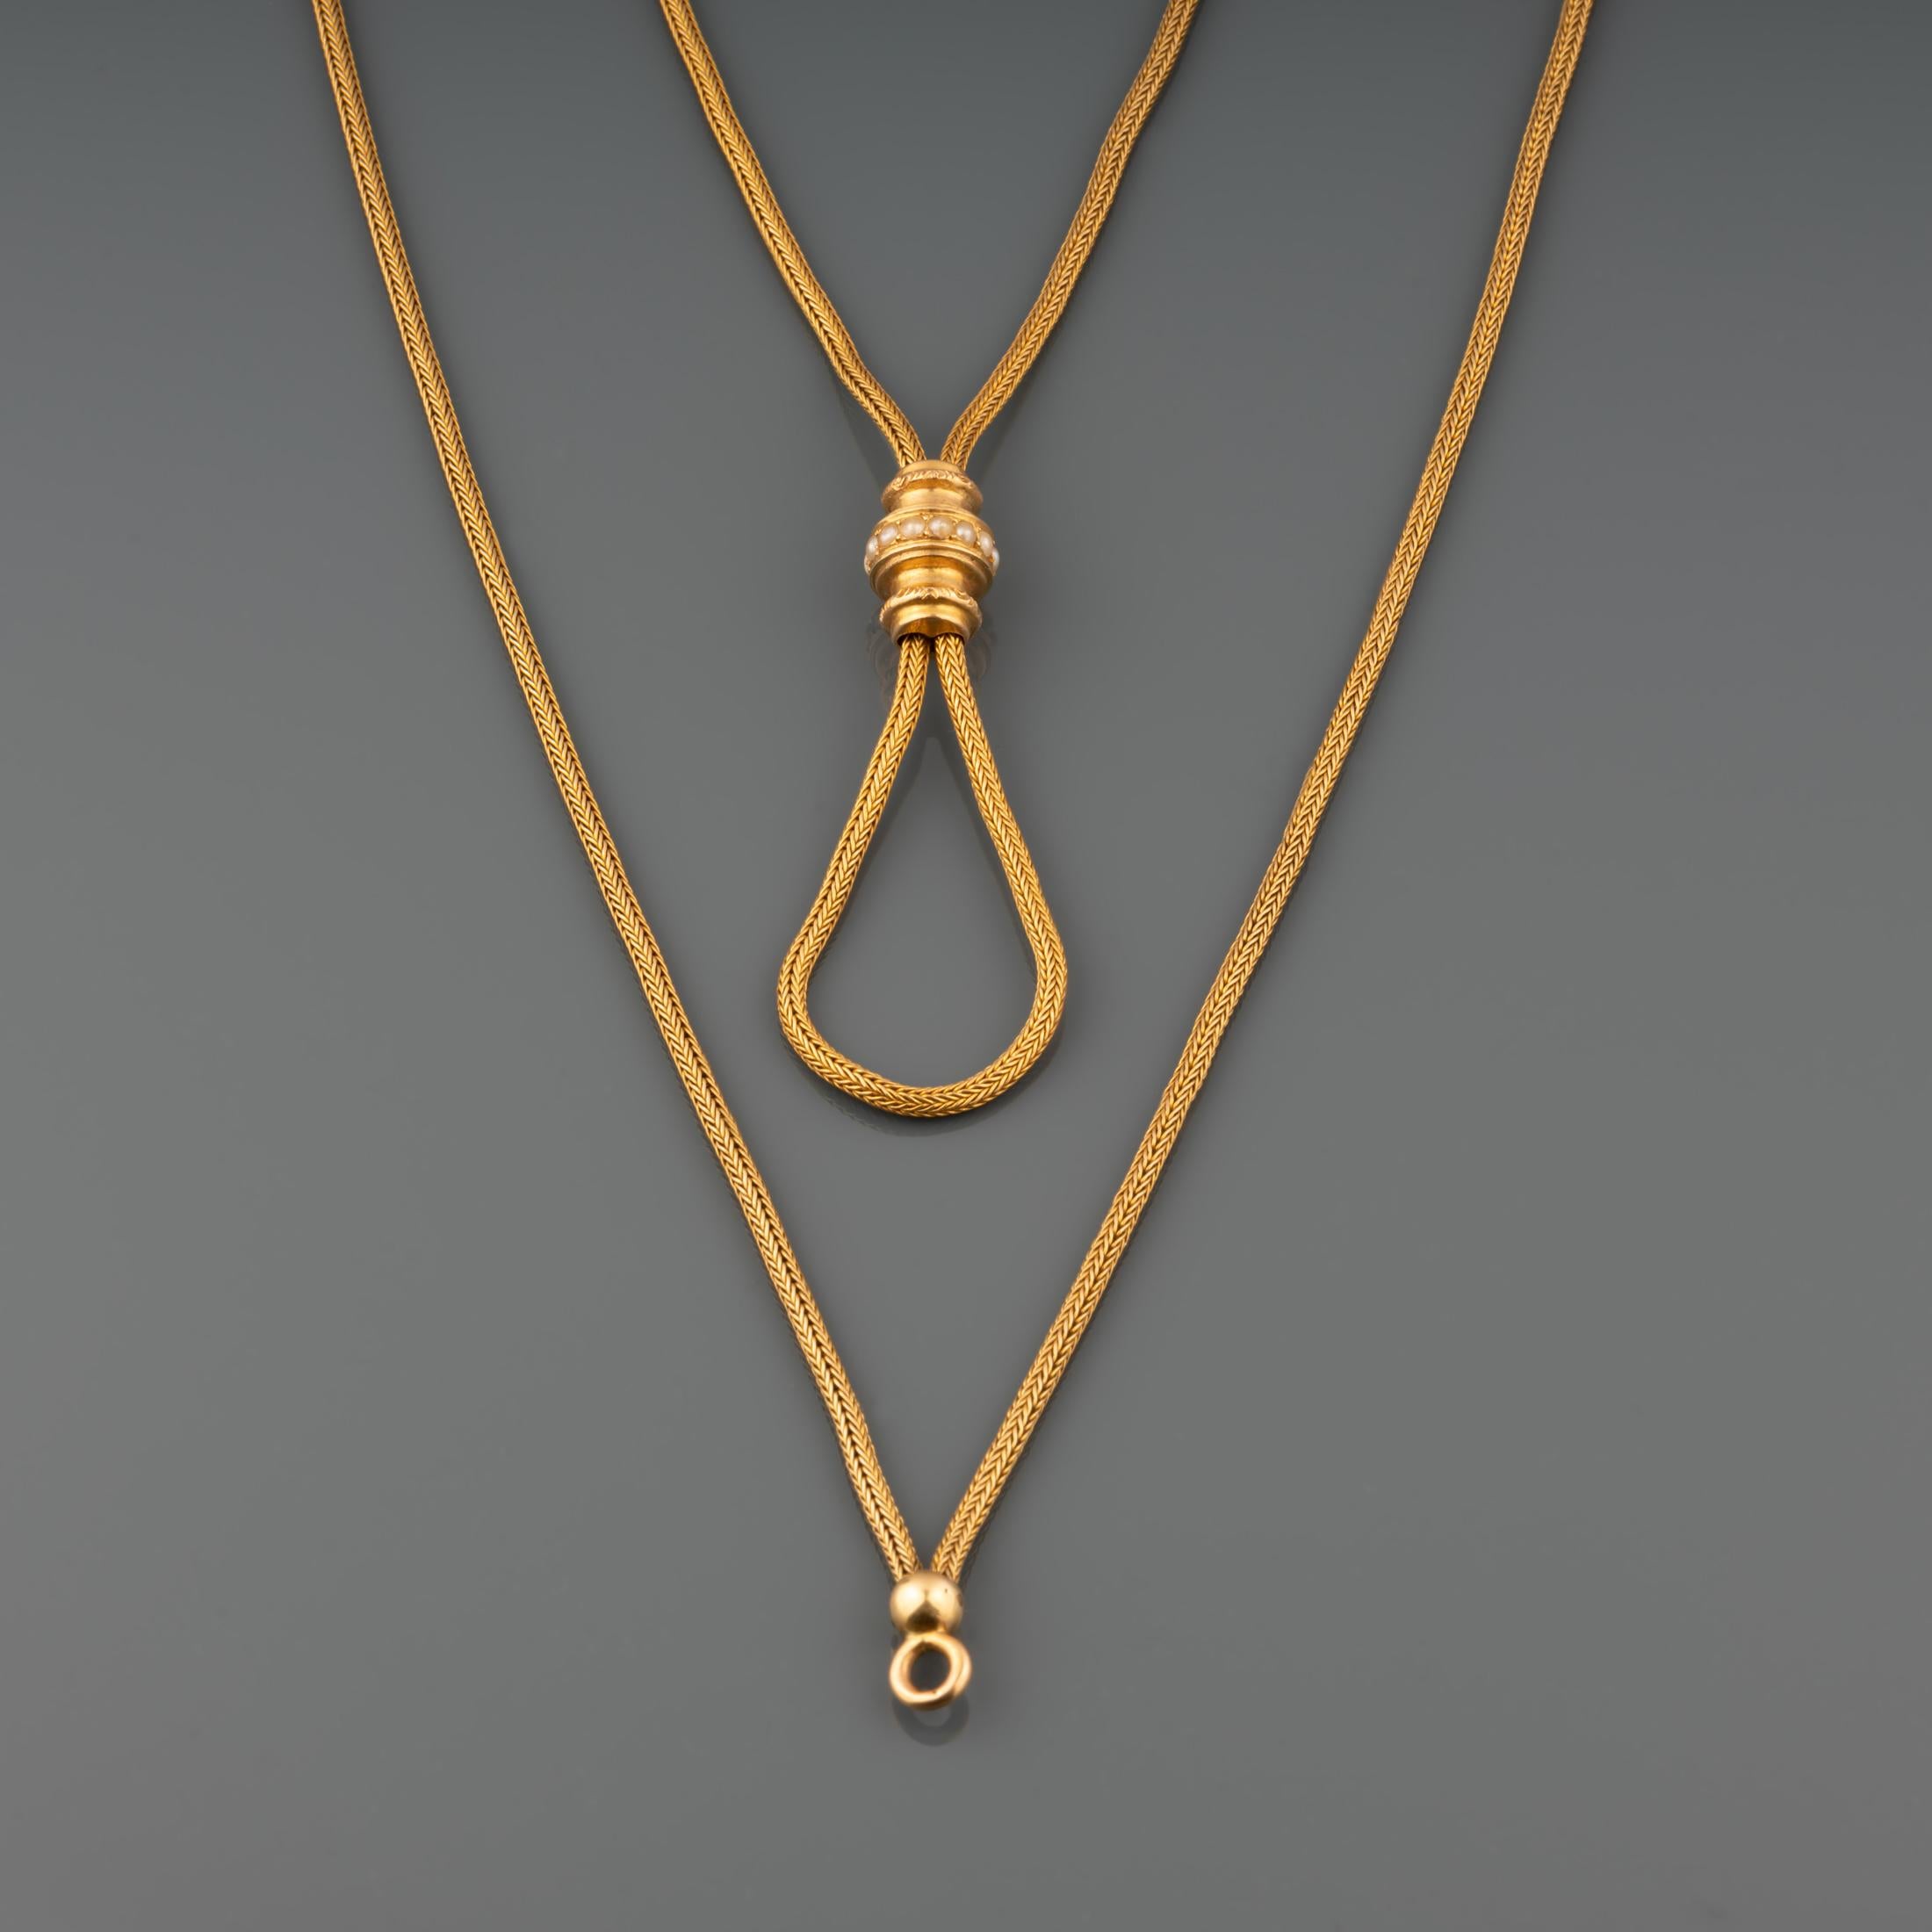 A very lovely antique chain made in France circa 1890.

Made in yellow gold 18k: eagle head and rhino head hallmarks.

The length is 146cm.

Weight: 41.40 grams.